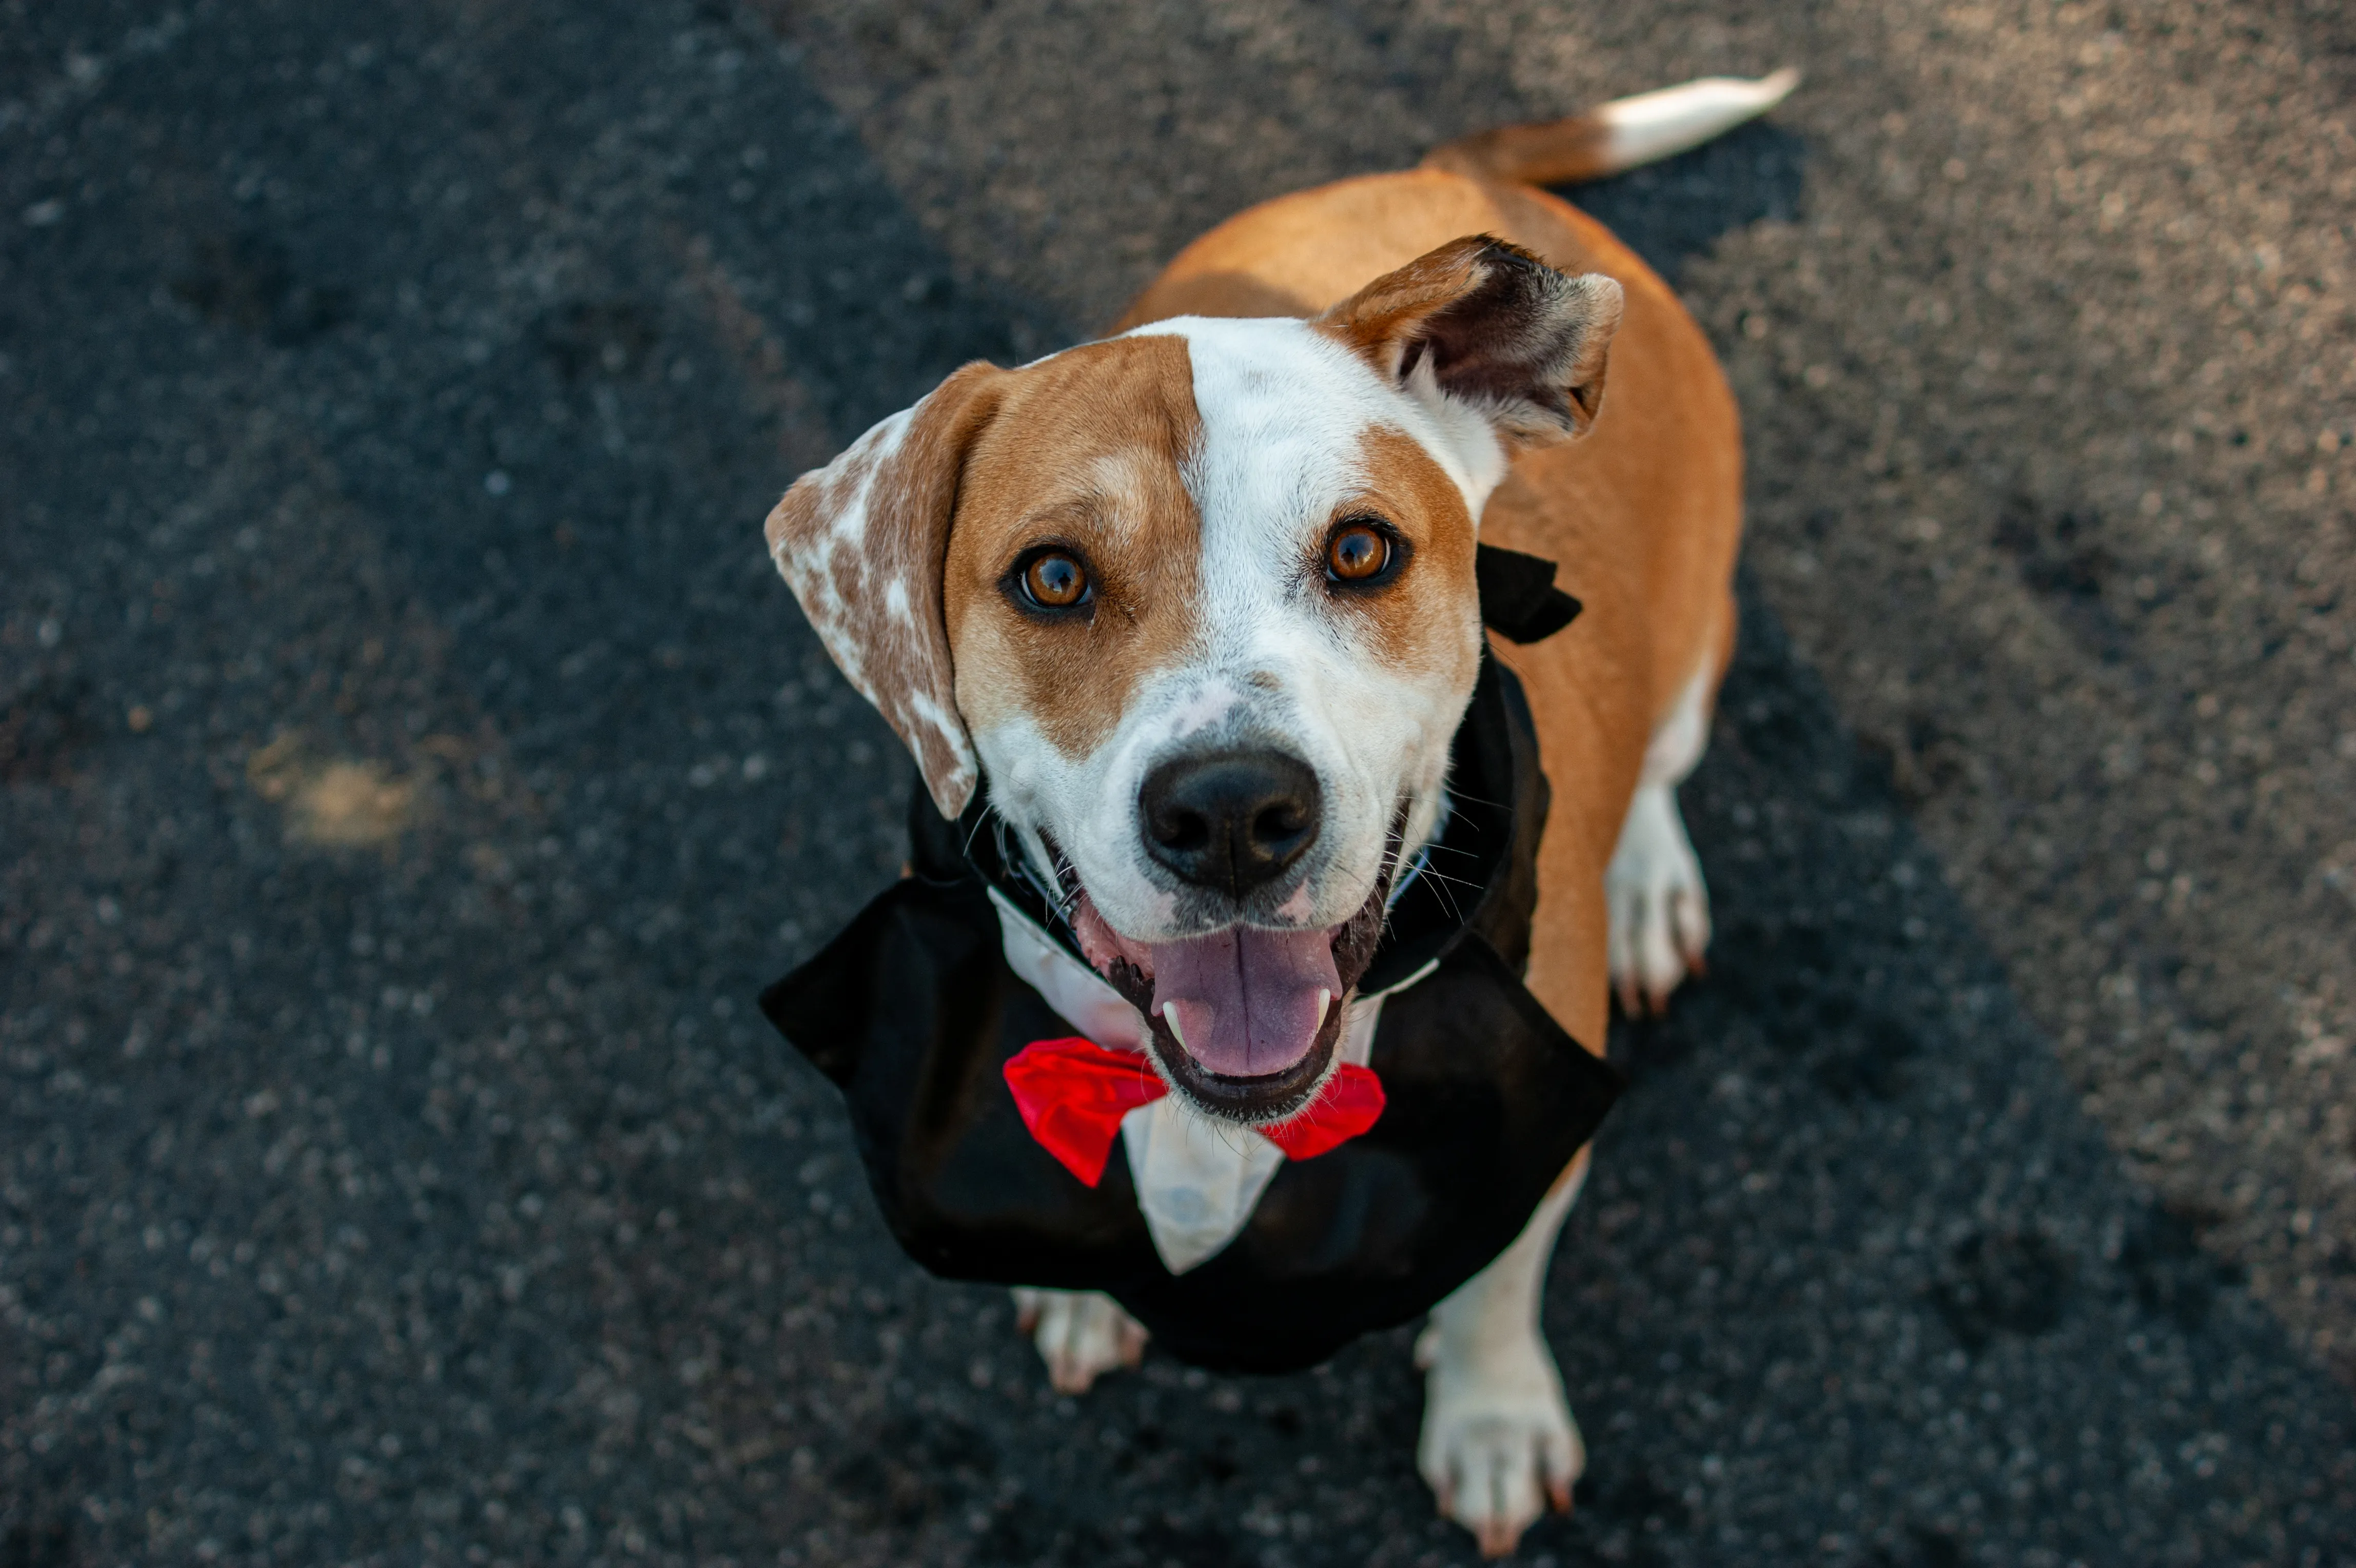 Beagle with one ear half missing looking up at the camera while wearing a tuxedo with a red bowtie